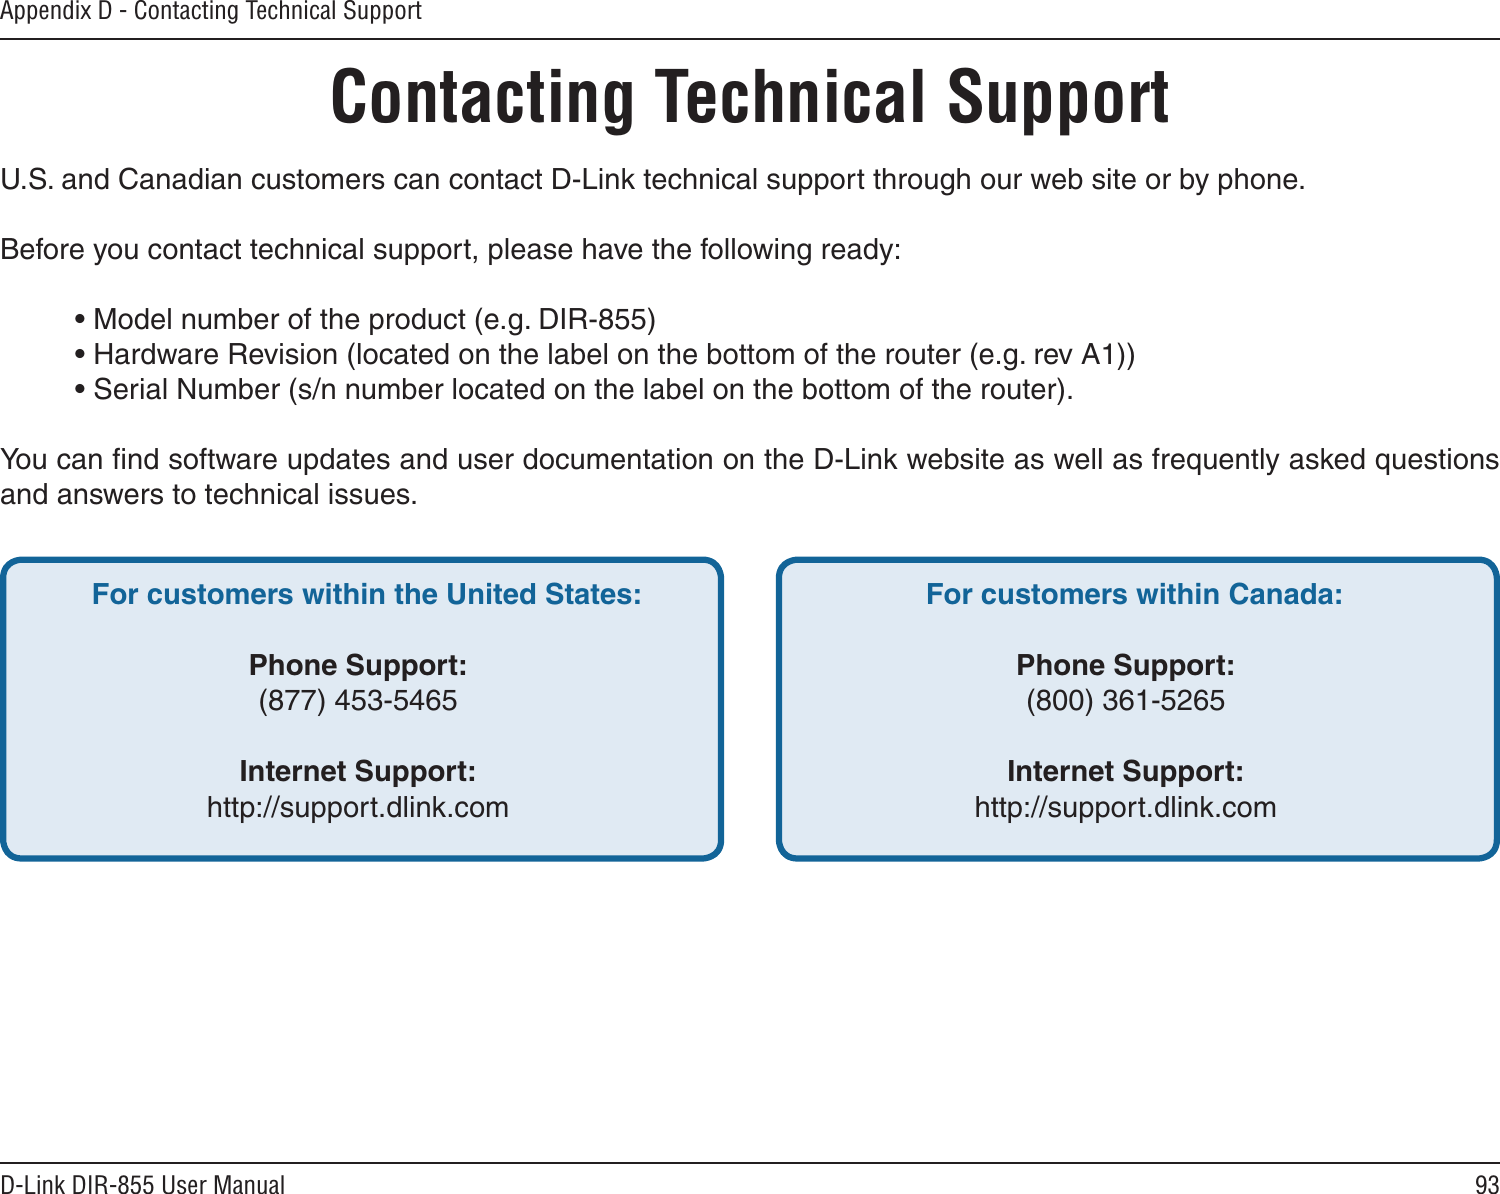 93D-Link DIR-855 User ManualAppendix D - Contacting Technical SupportContacting Technical SupportU.S. and Canadian customers can contact D-Link technical support through our web site or by phone.Before you contact technical support, please have the following ready:  • Model number of the product (e.g. DIR-855)  • Hardware Revision (located on the label on the bottom of the router (e.g. rev A1))  • Serial Number (s/n number located on the label on the bottom of the router). You can ﬁnd software updates and user documentation on the D-Link website as well as frequently asked questions and answers to technical issues.For customers within the United States: Phone Support:(877) 453-5465Internet Support:http://support.dlink.com For customers within Canada: Phone Support:(800) 361-5265Internet Support:http://support.dlink.com 